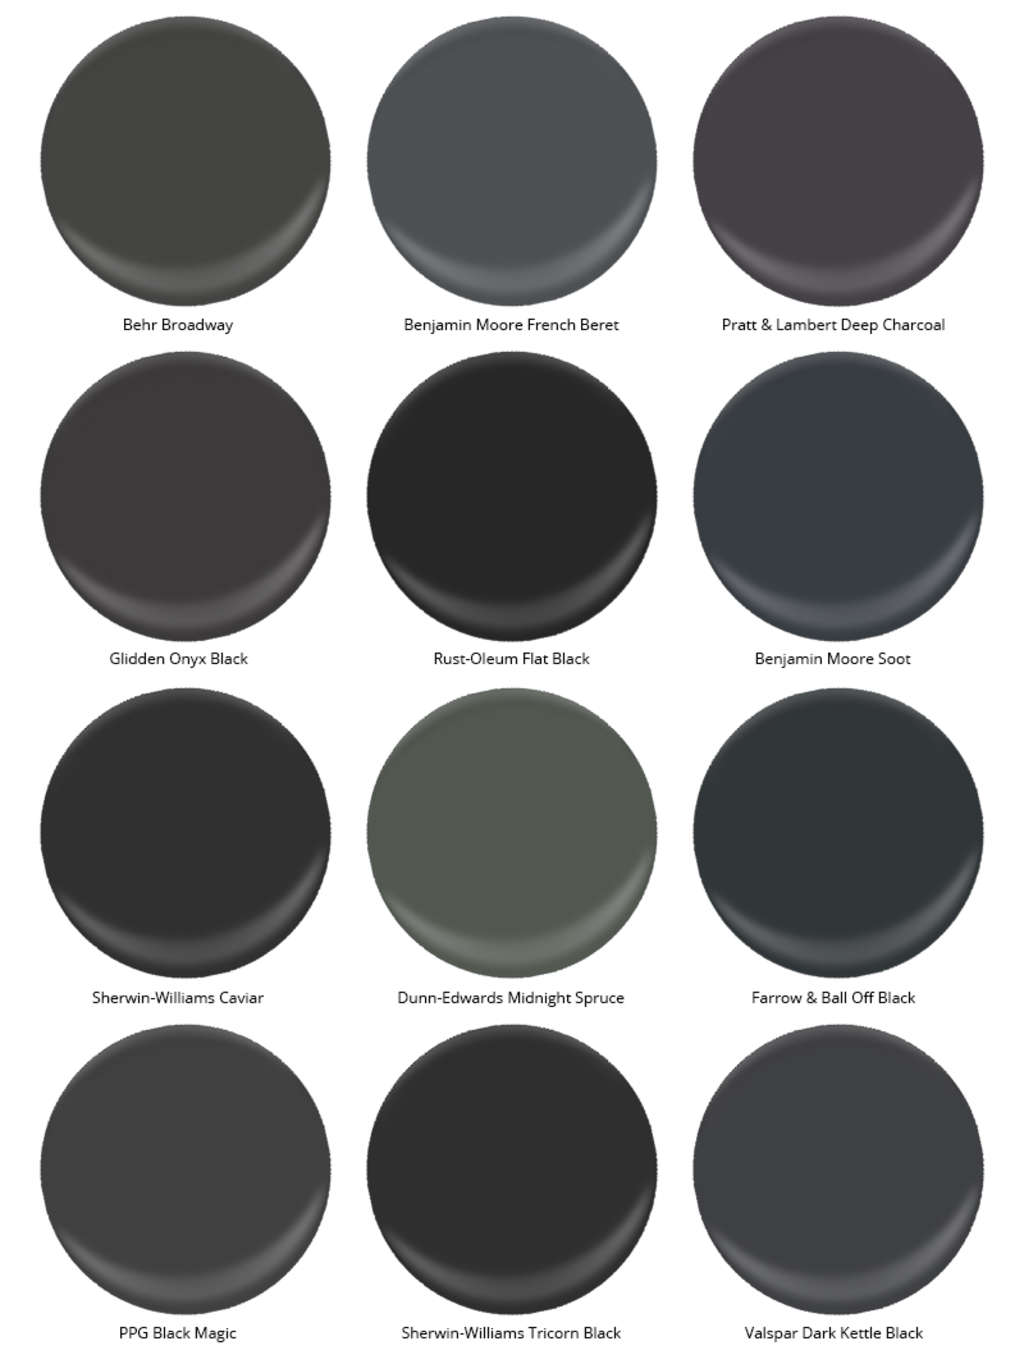 Trade Secrets: The Best Black Paint Colors for Any Room | Apartment Therapy